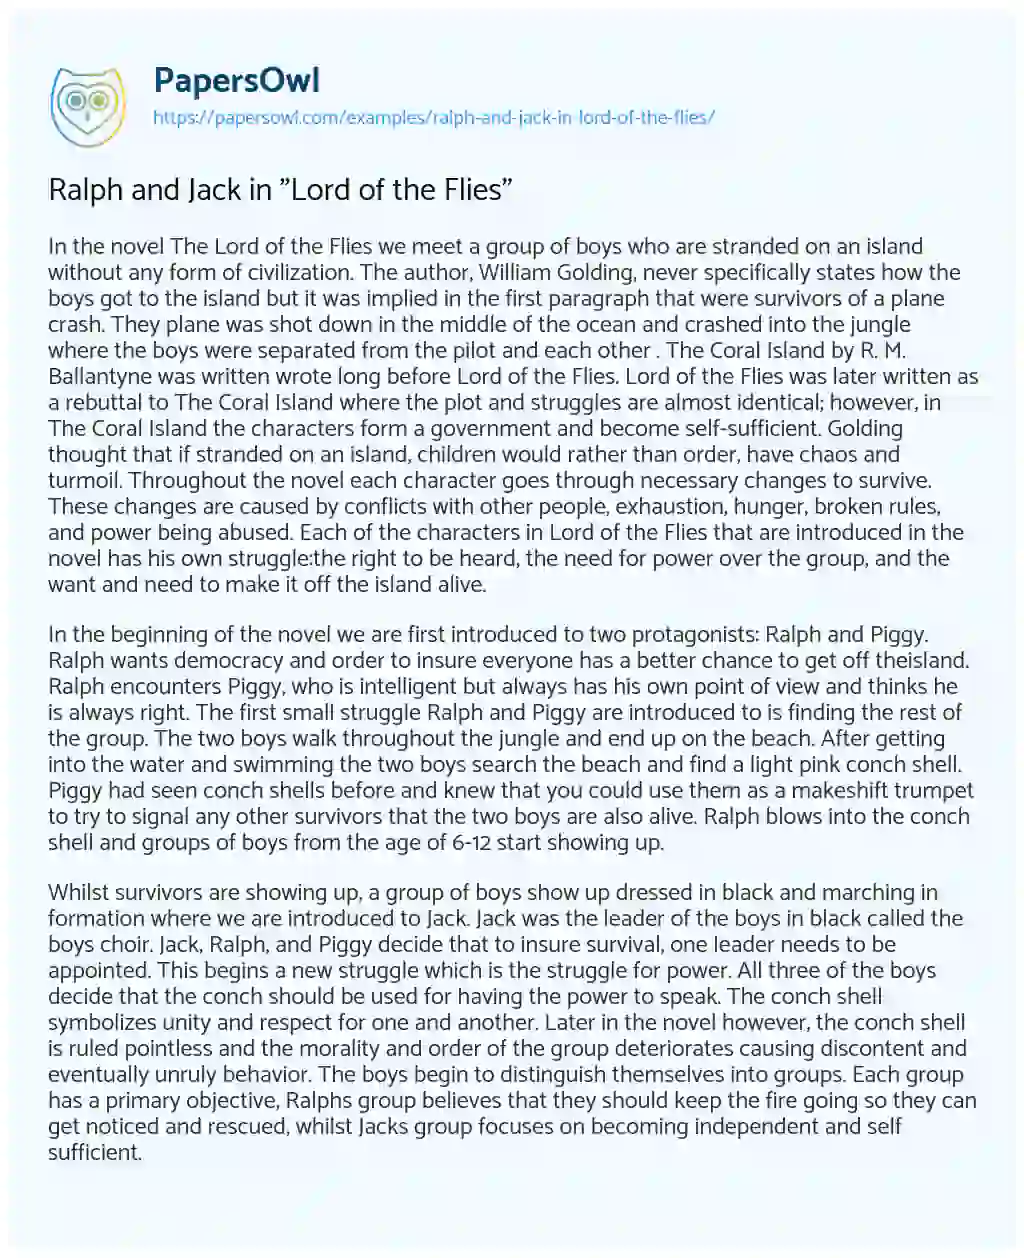 Essay on Ralph and Jack in “Lord of the Flies”